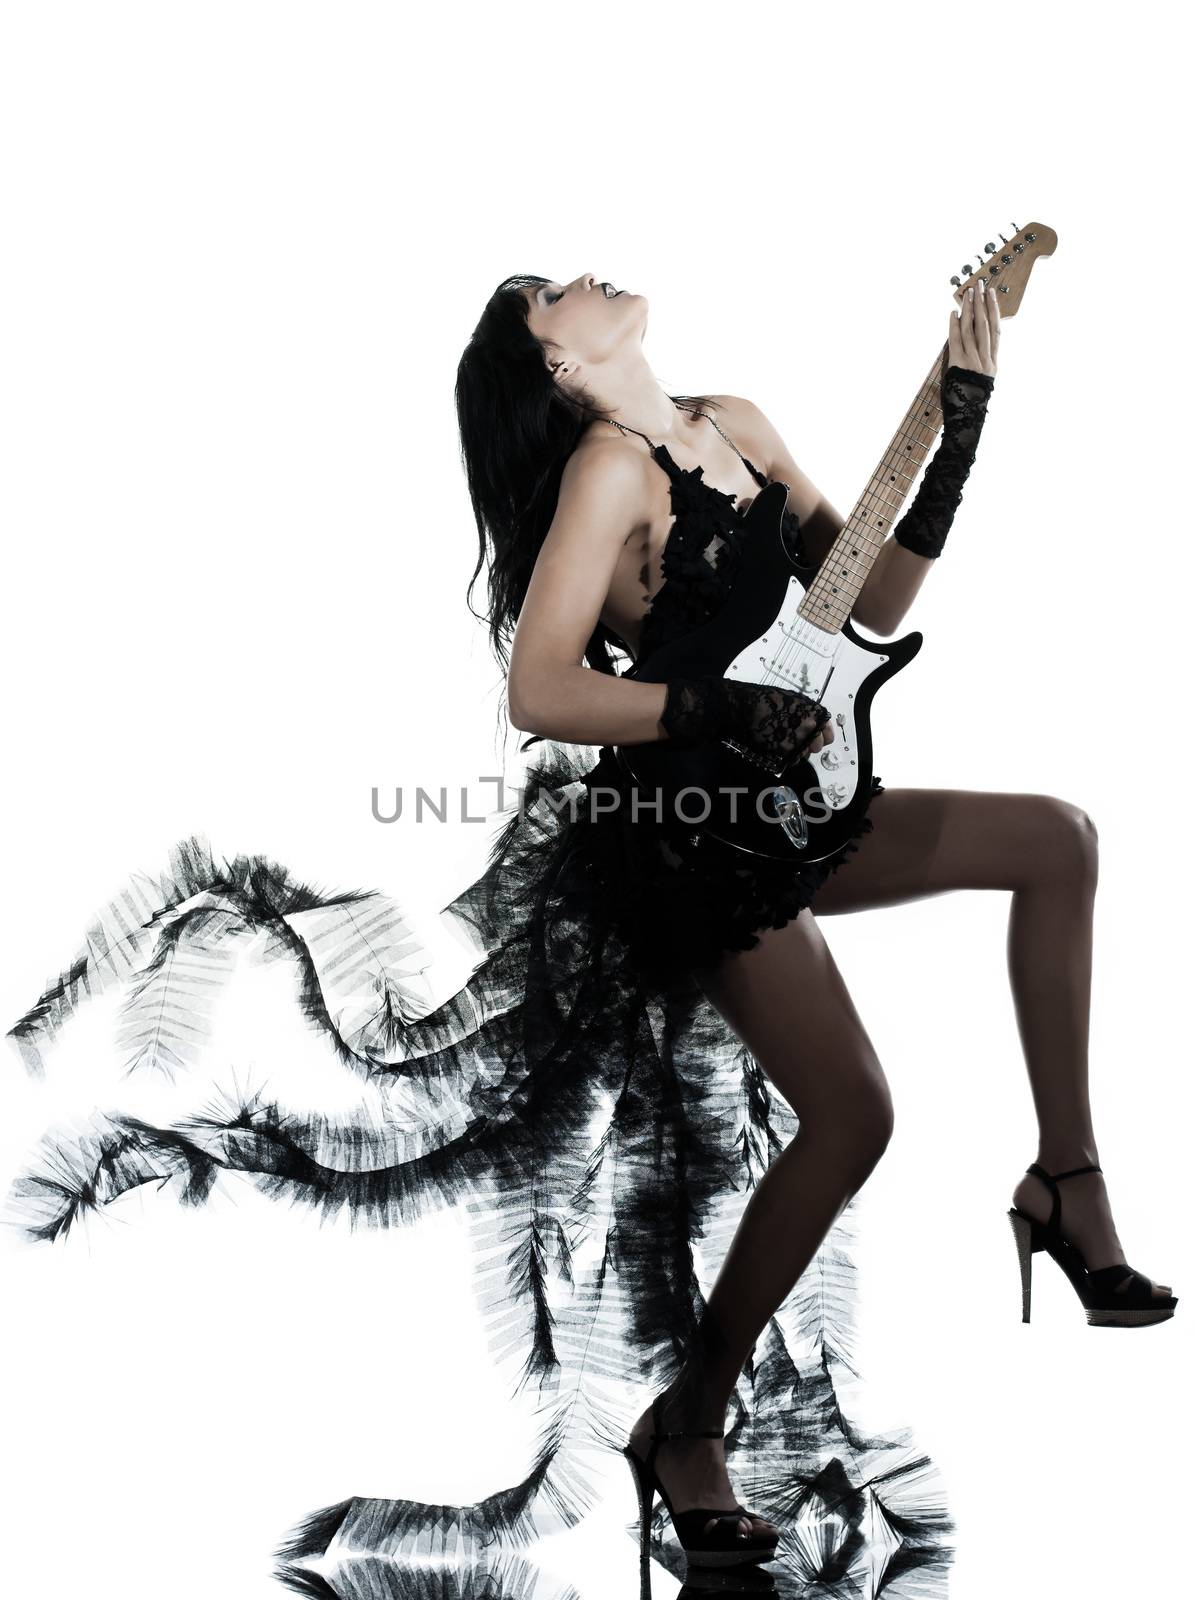 woman playing electric guitar player by PIXSTILL